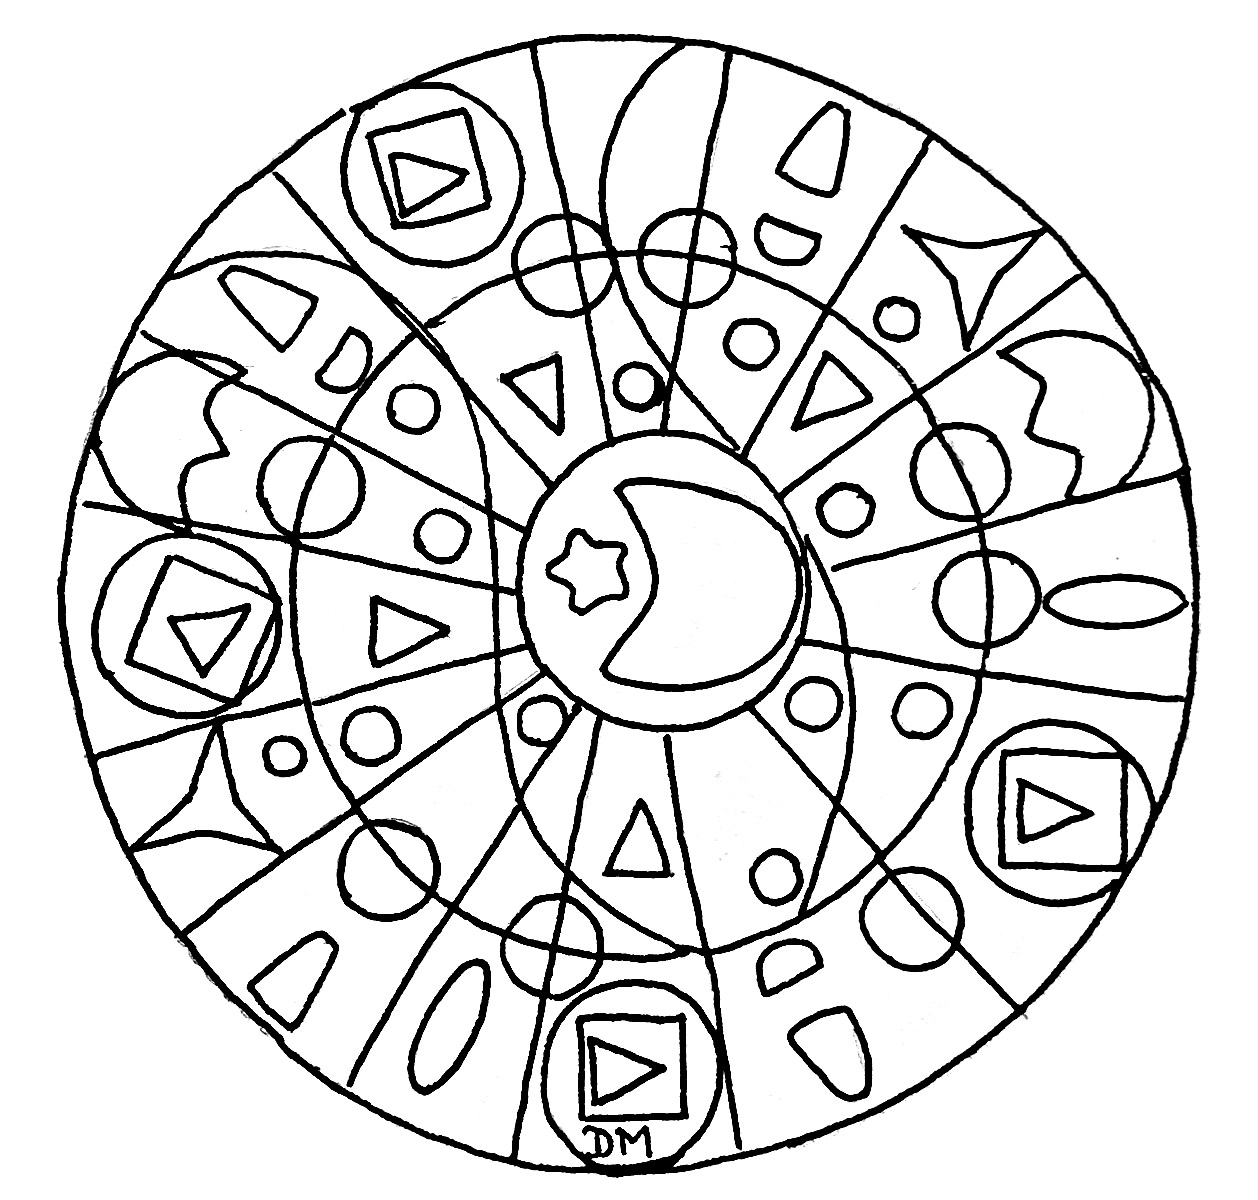 A Mandala of 'standard' difficulty level, which will be suitable for children and adults who want coloring neither too simple nor too difficult.